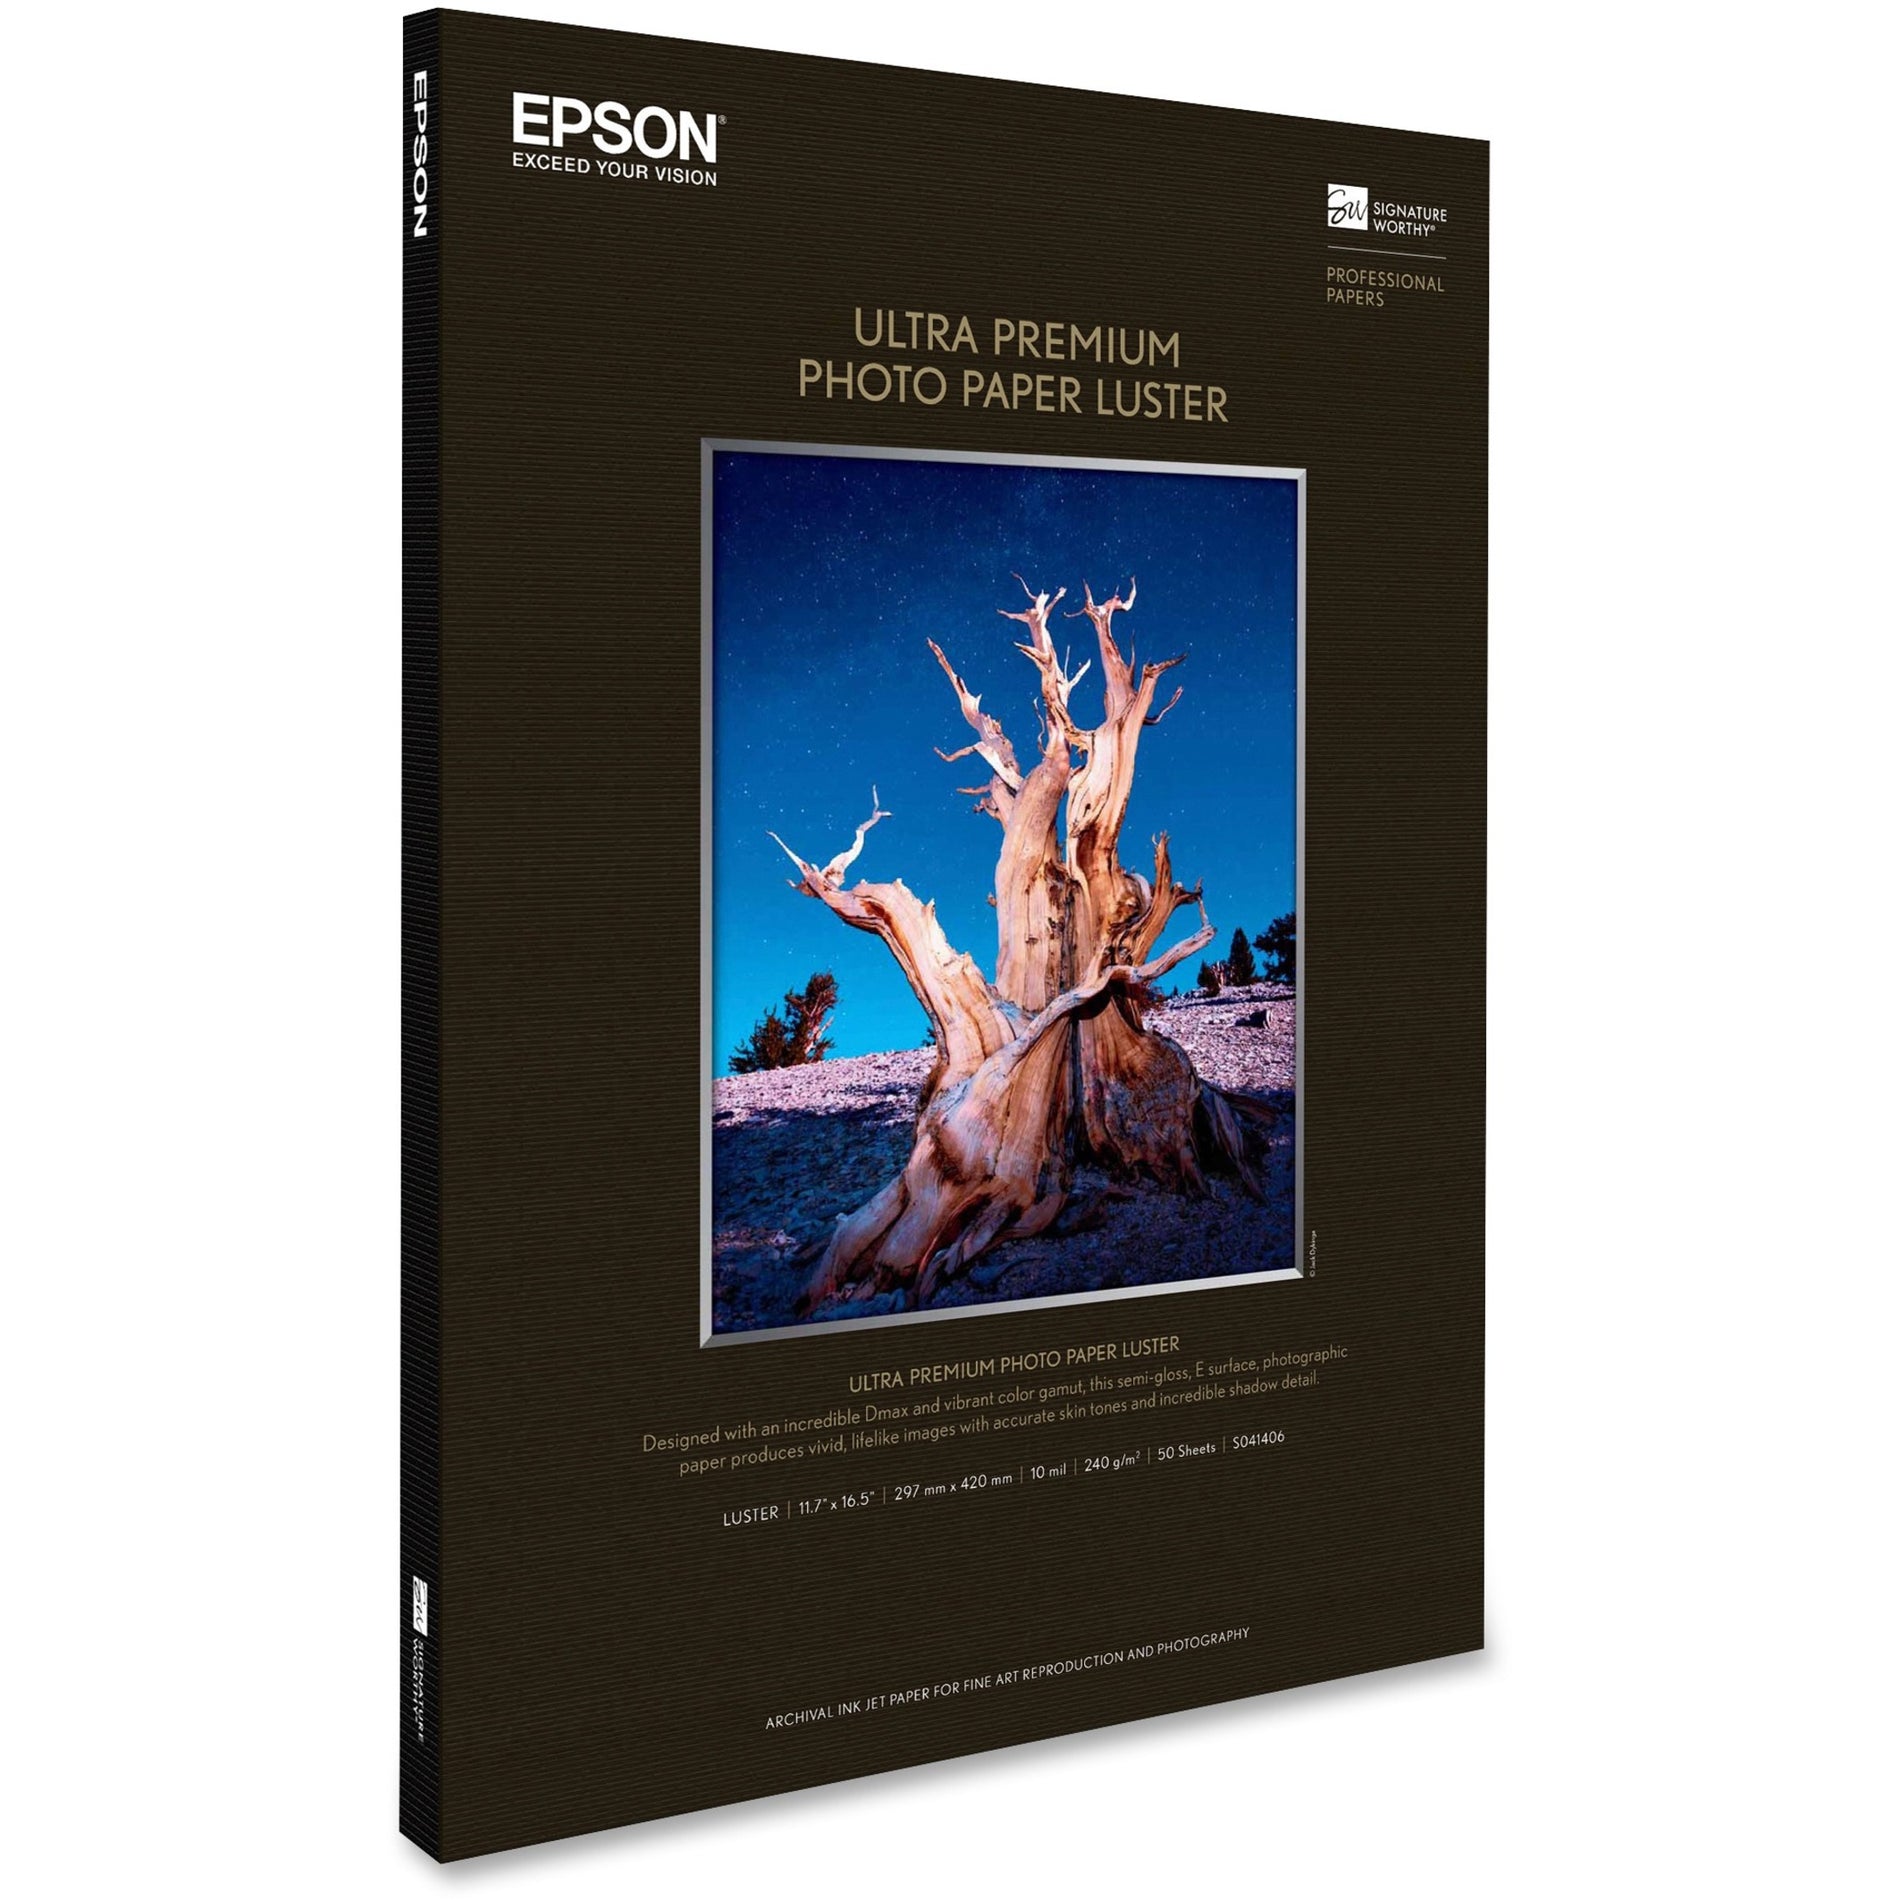 Epson S041406 Photographic Papers, Highest Color Gamut, Luster Finish, 50 Sheet Pack, 240gsm